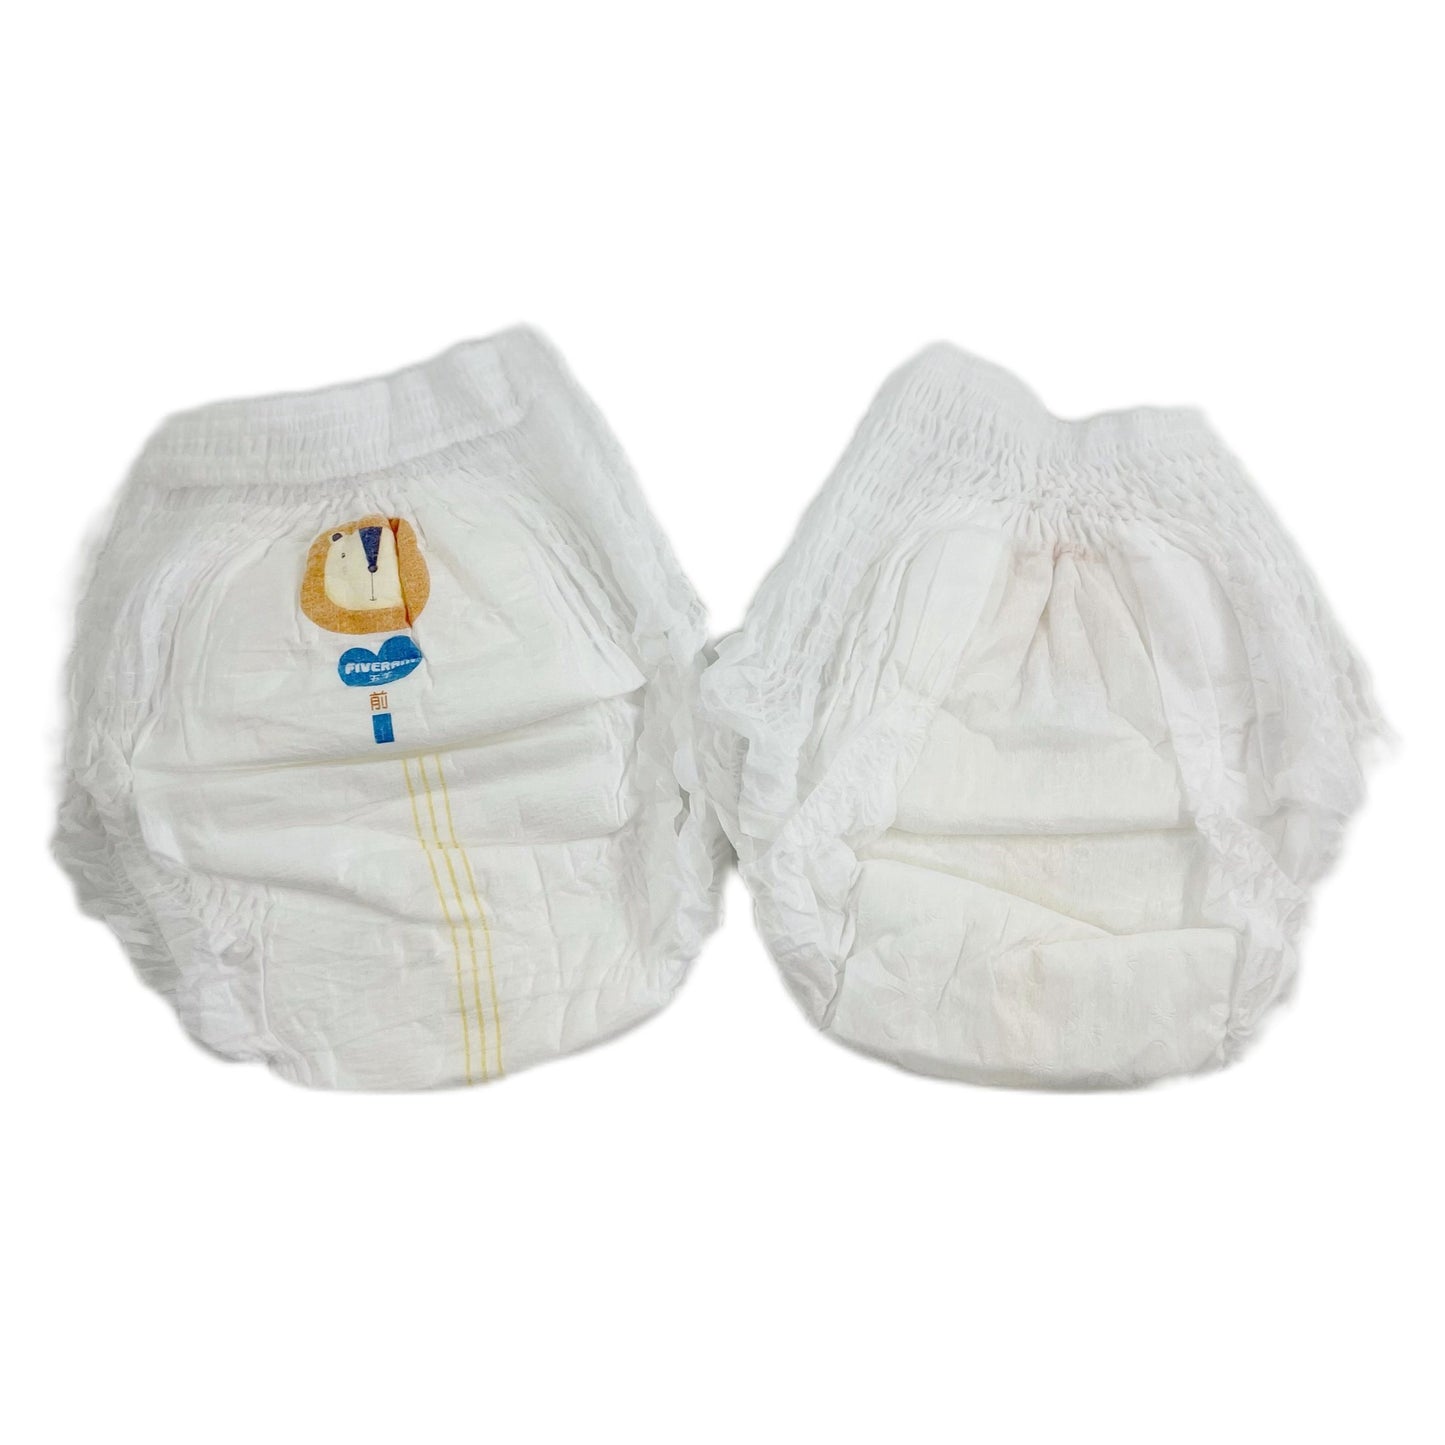 Soft and Cheap Grade B Baby Pull-up Diaper Pants